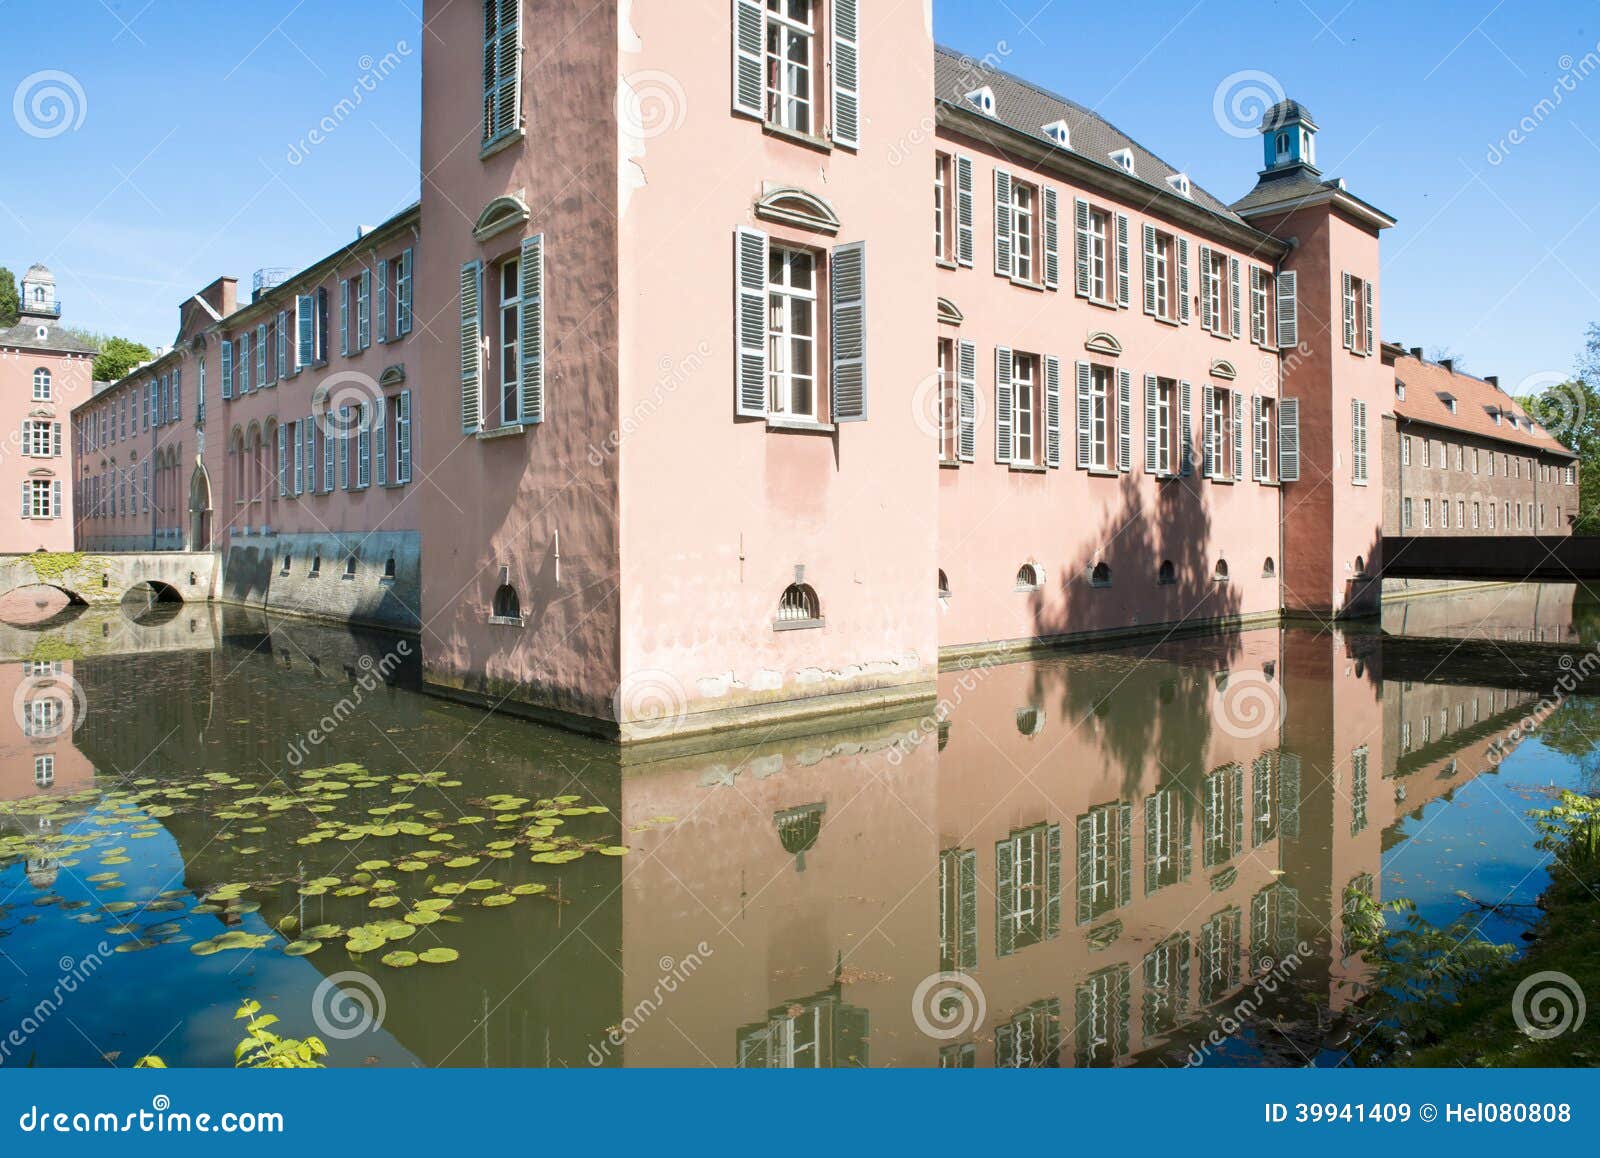 moated castle in germany. castlewith ditch in dusseldorf kalkum 